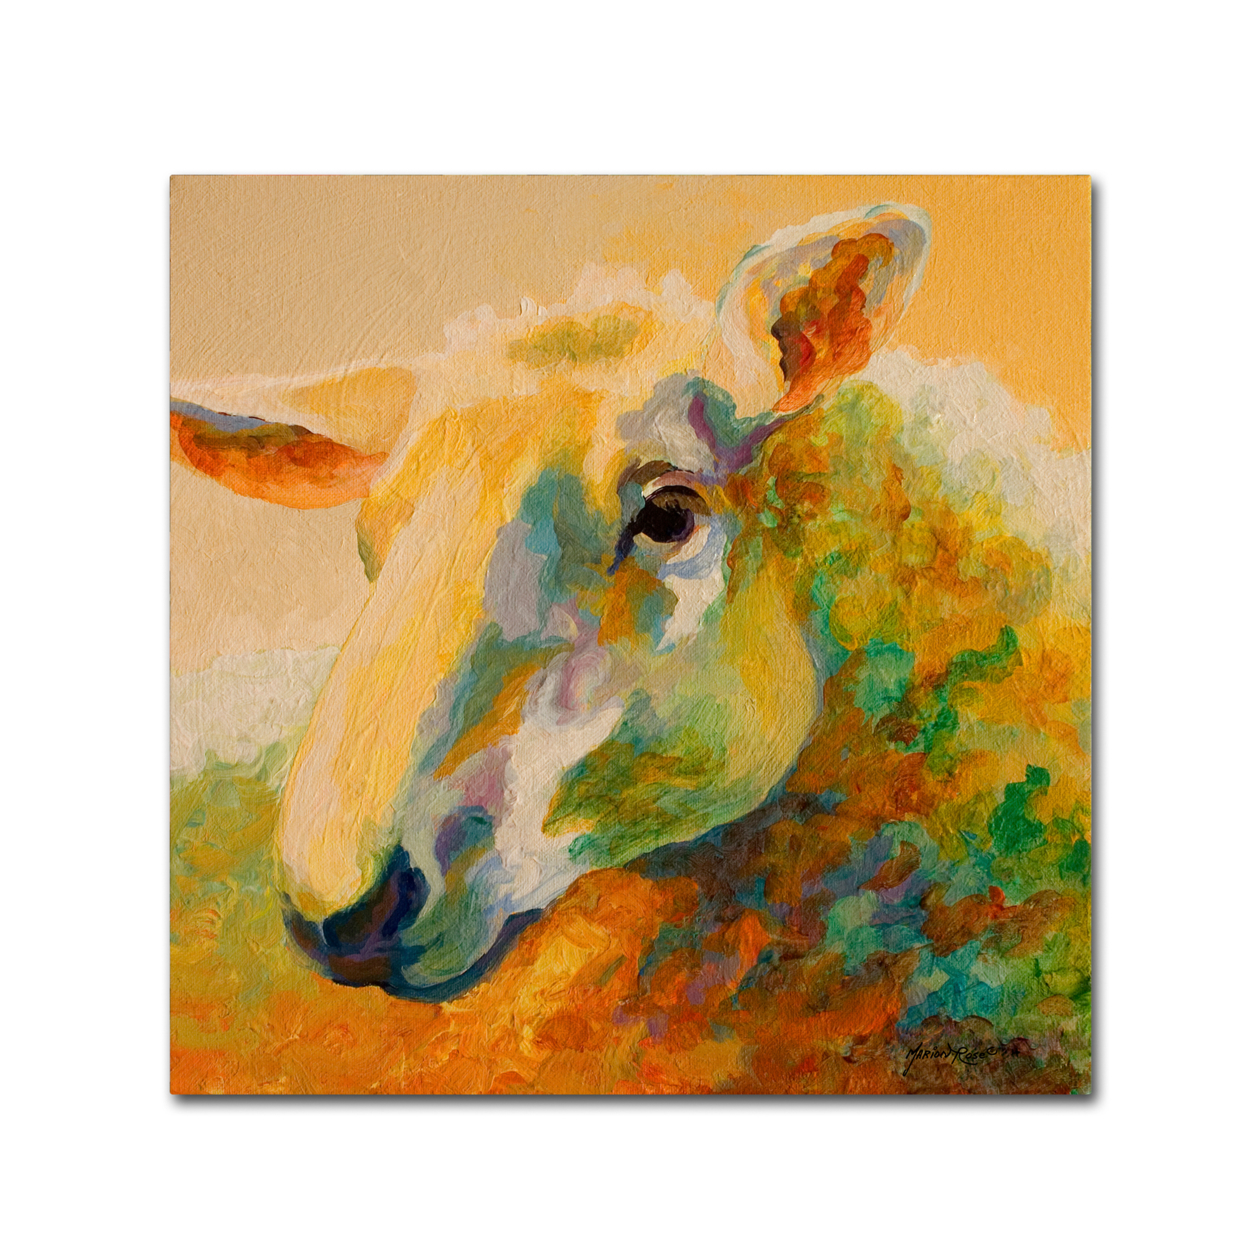 Marion Rose 'Ewe Study III' Ready To Hang Canvas Art 35 X 35 Inches Made In USA